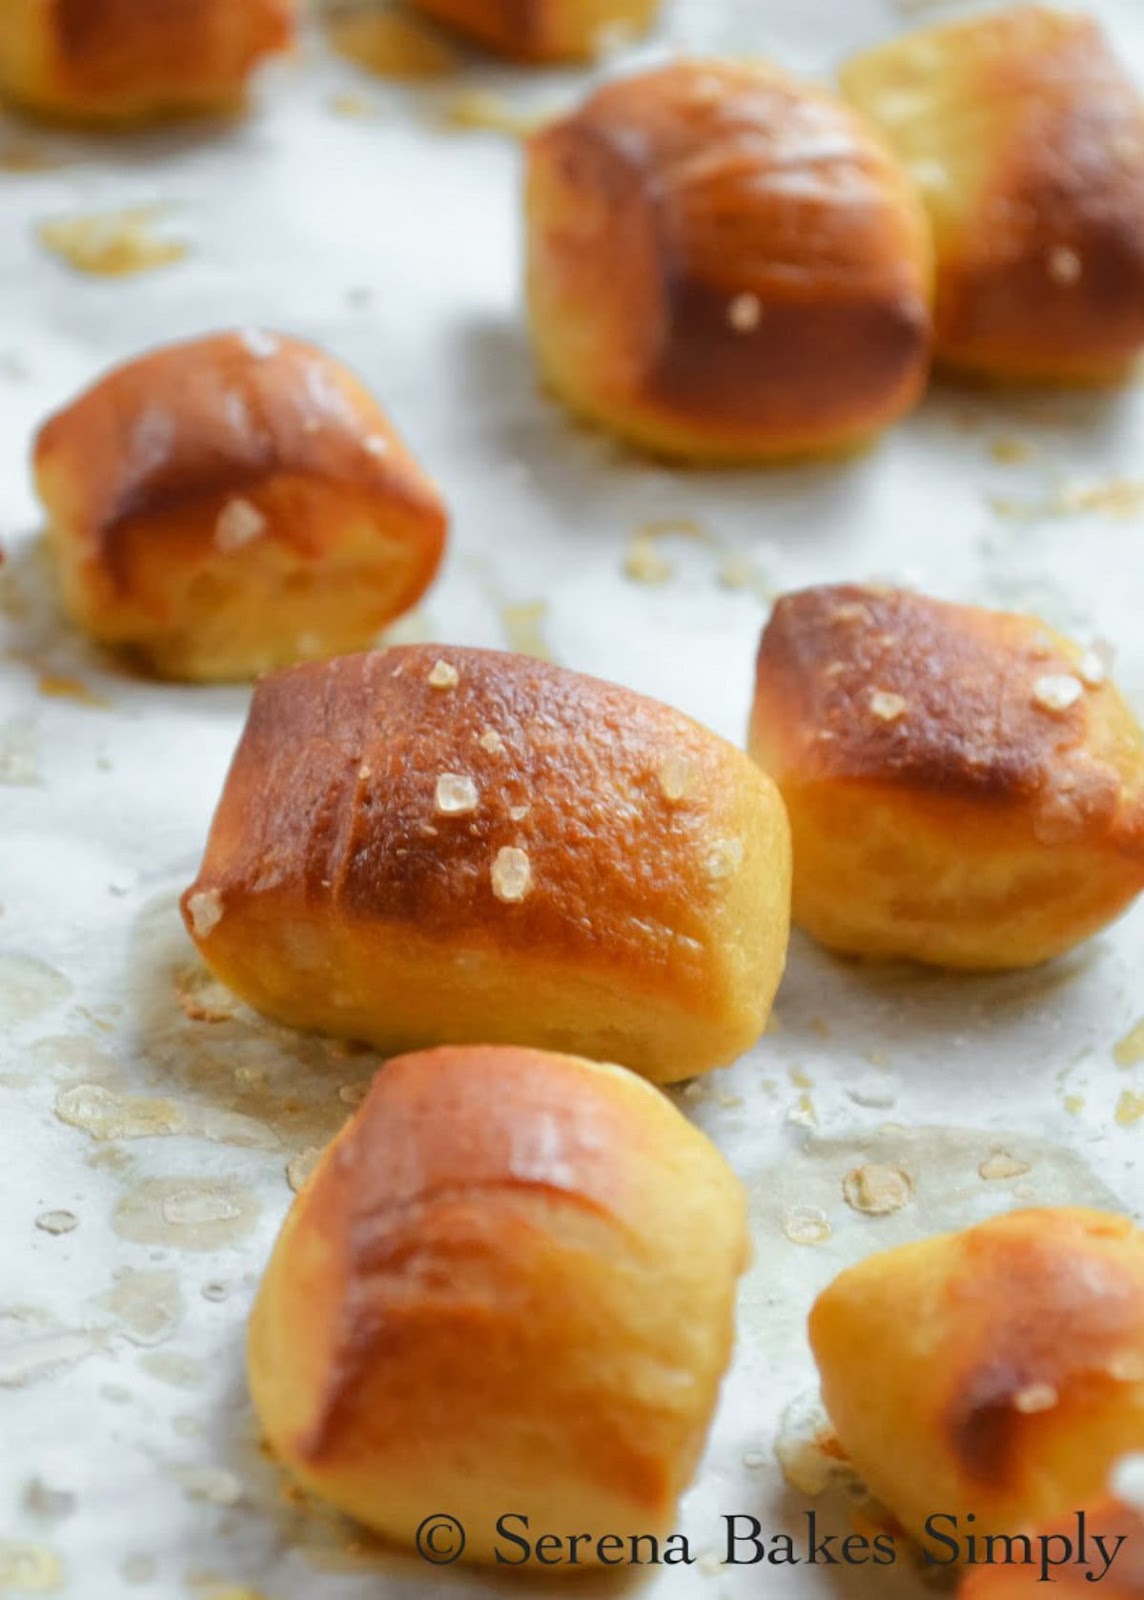 Recipe for Soft Pretzel Bites. These are a favorite at Super Bowl parties! Great for dipping in homemade nacho cheese sauce from Serena Bakes Simply From Scratch.